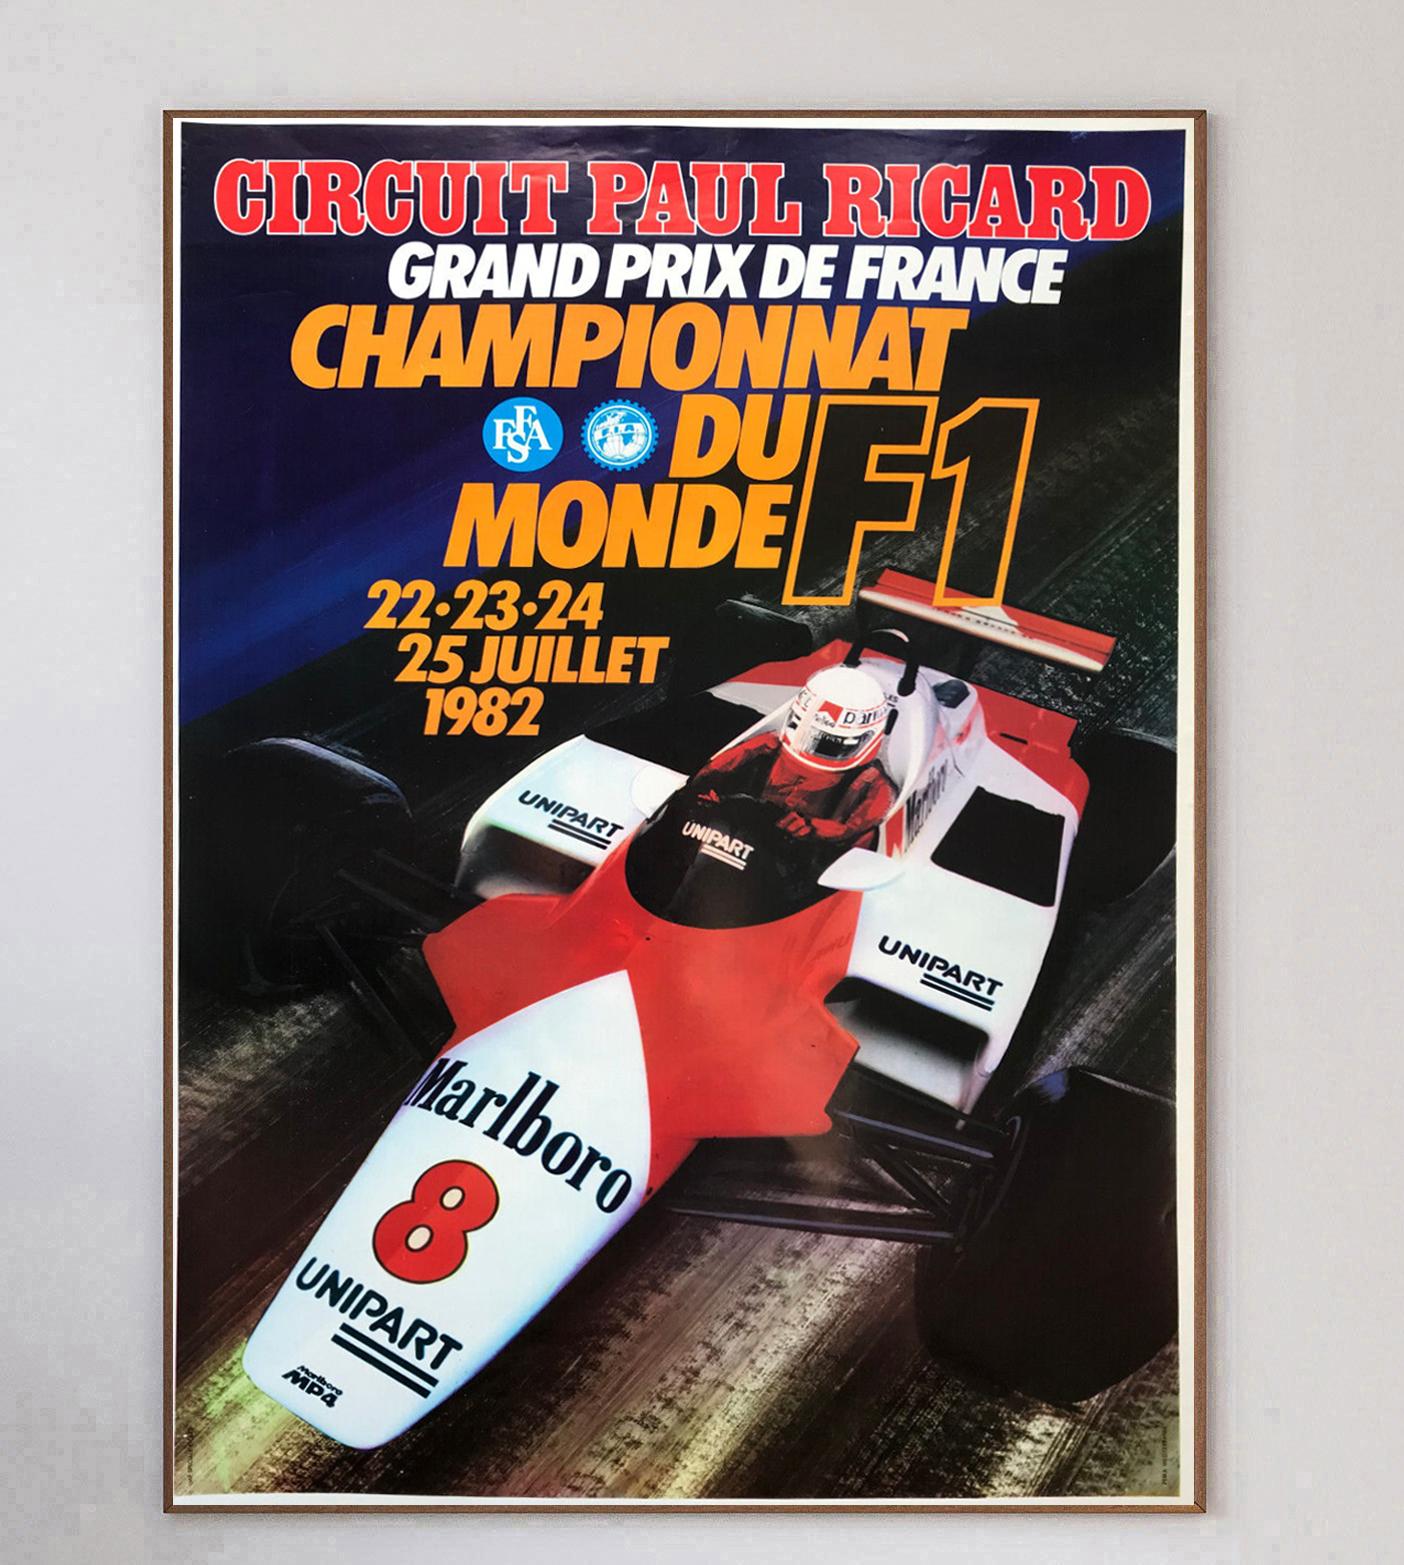 This poster is for the 1982 France Formula 1 Grand Prix, held at the Circuit Paul Ricard. 

The wonderful design shows the legendary Niki Lauda driving in the McLaren, whilst Rene Arnoux won the race driving for Renault. 